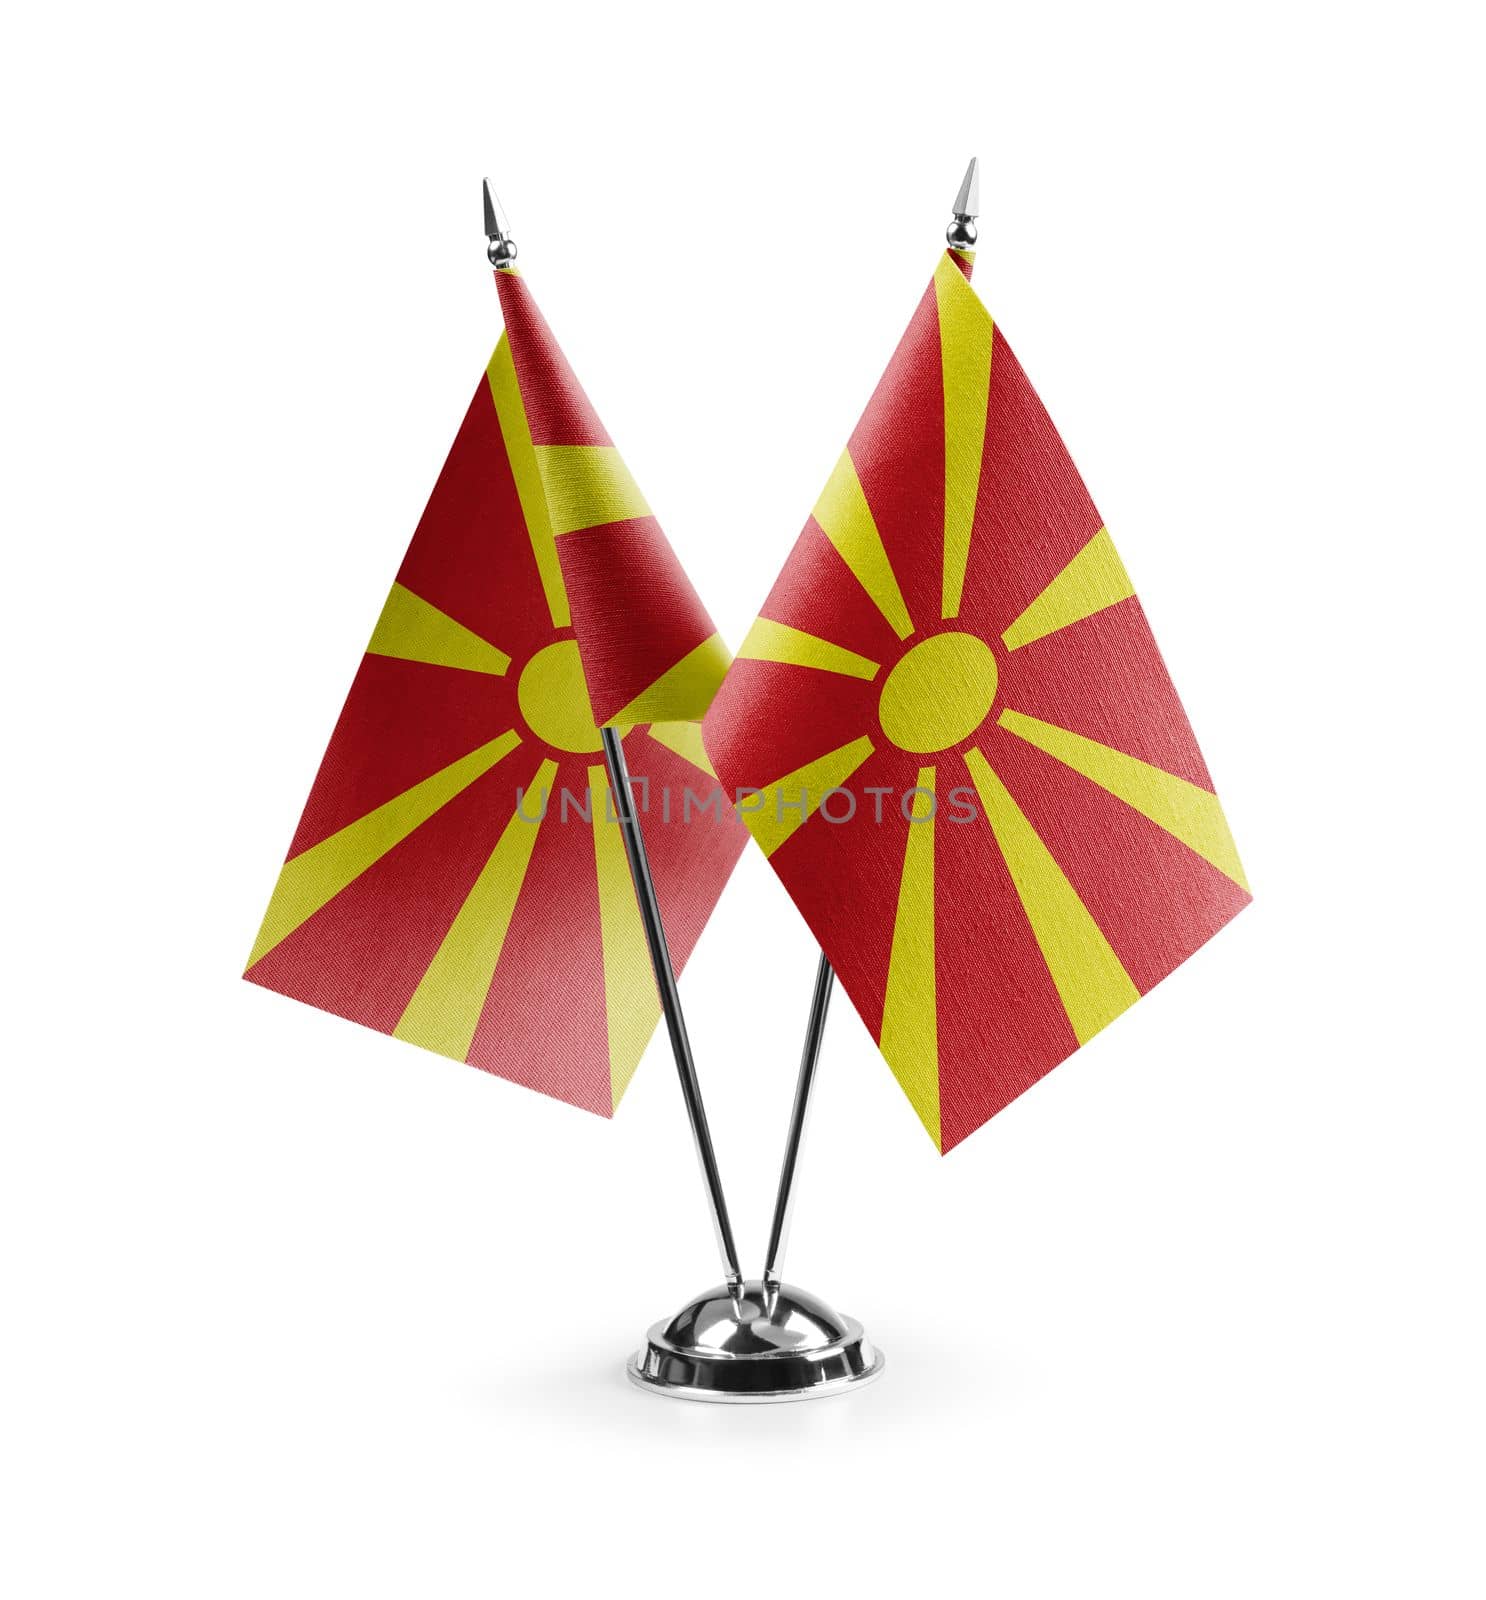 Small national flags of the Macedonia on a white background.